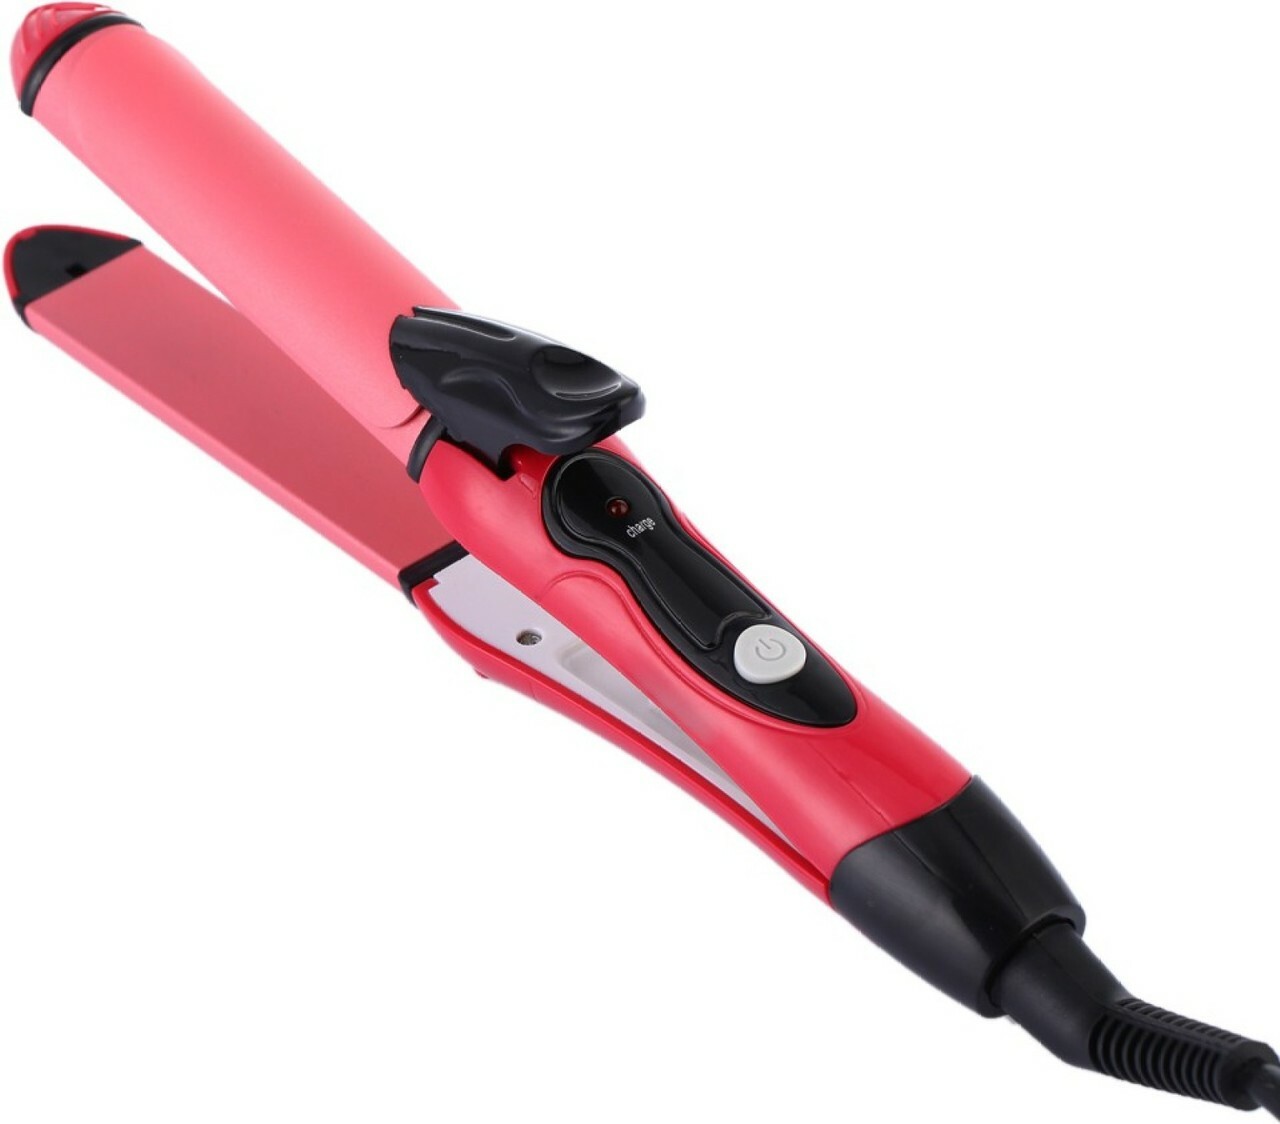 2 in 1 Nova Hair Straightener And Curler Twist Straightening Curling Iron Professional Negative Ion Fast Heating Styling Flat Iron